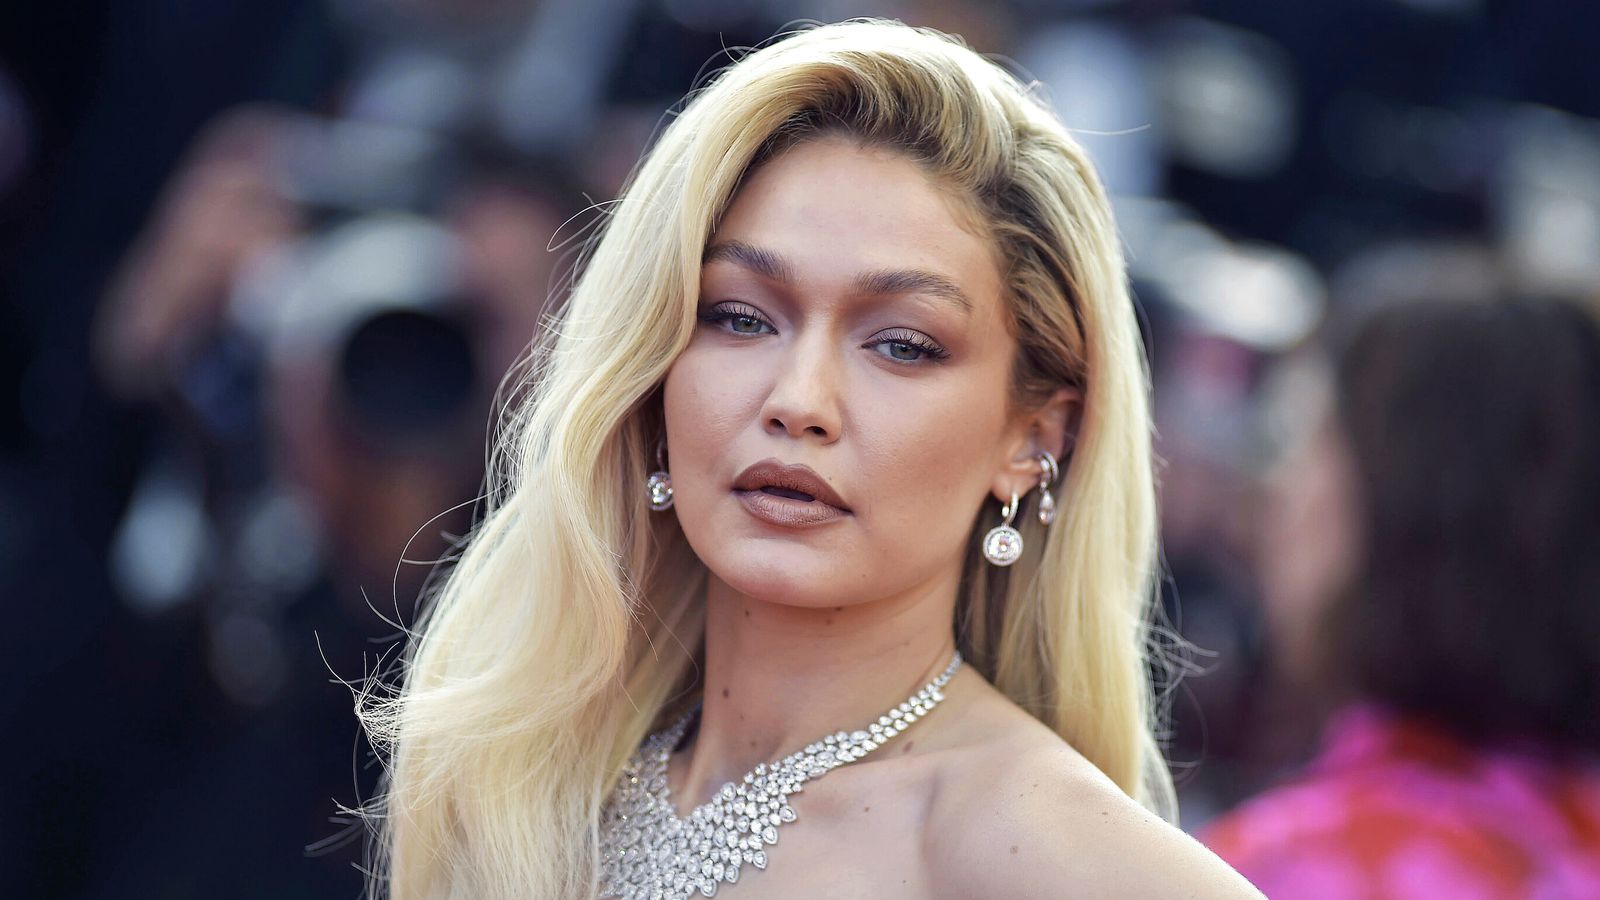 Gigi Hadid arrested after cannabis found in luggage on holiday to Cayman Islands